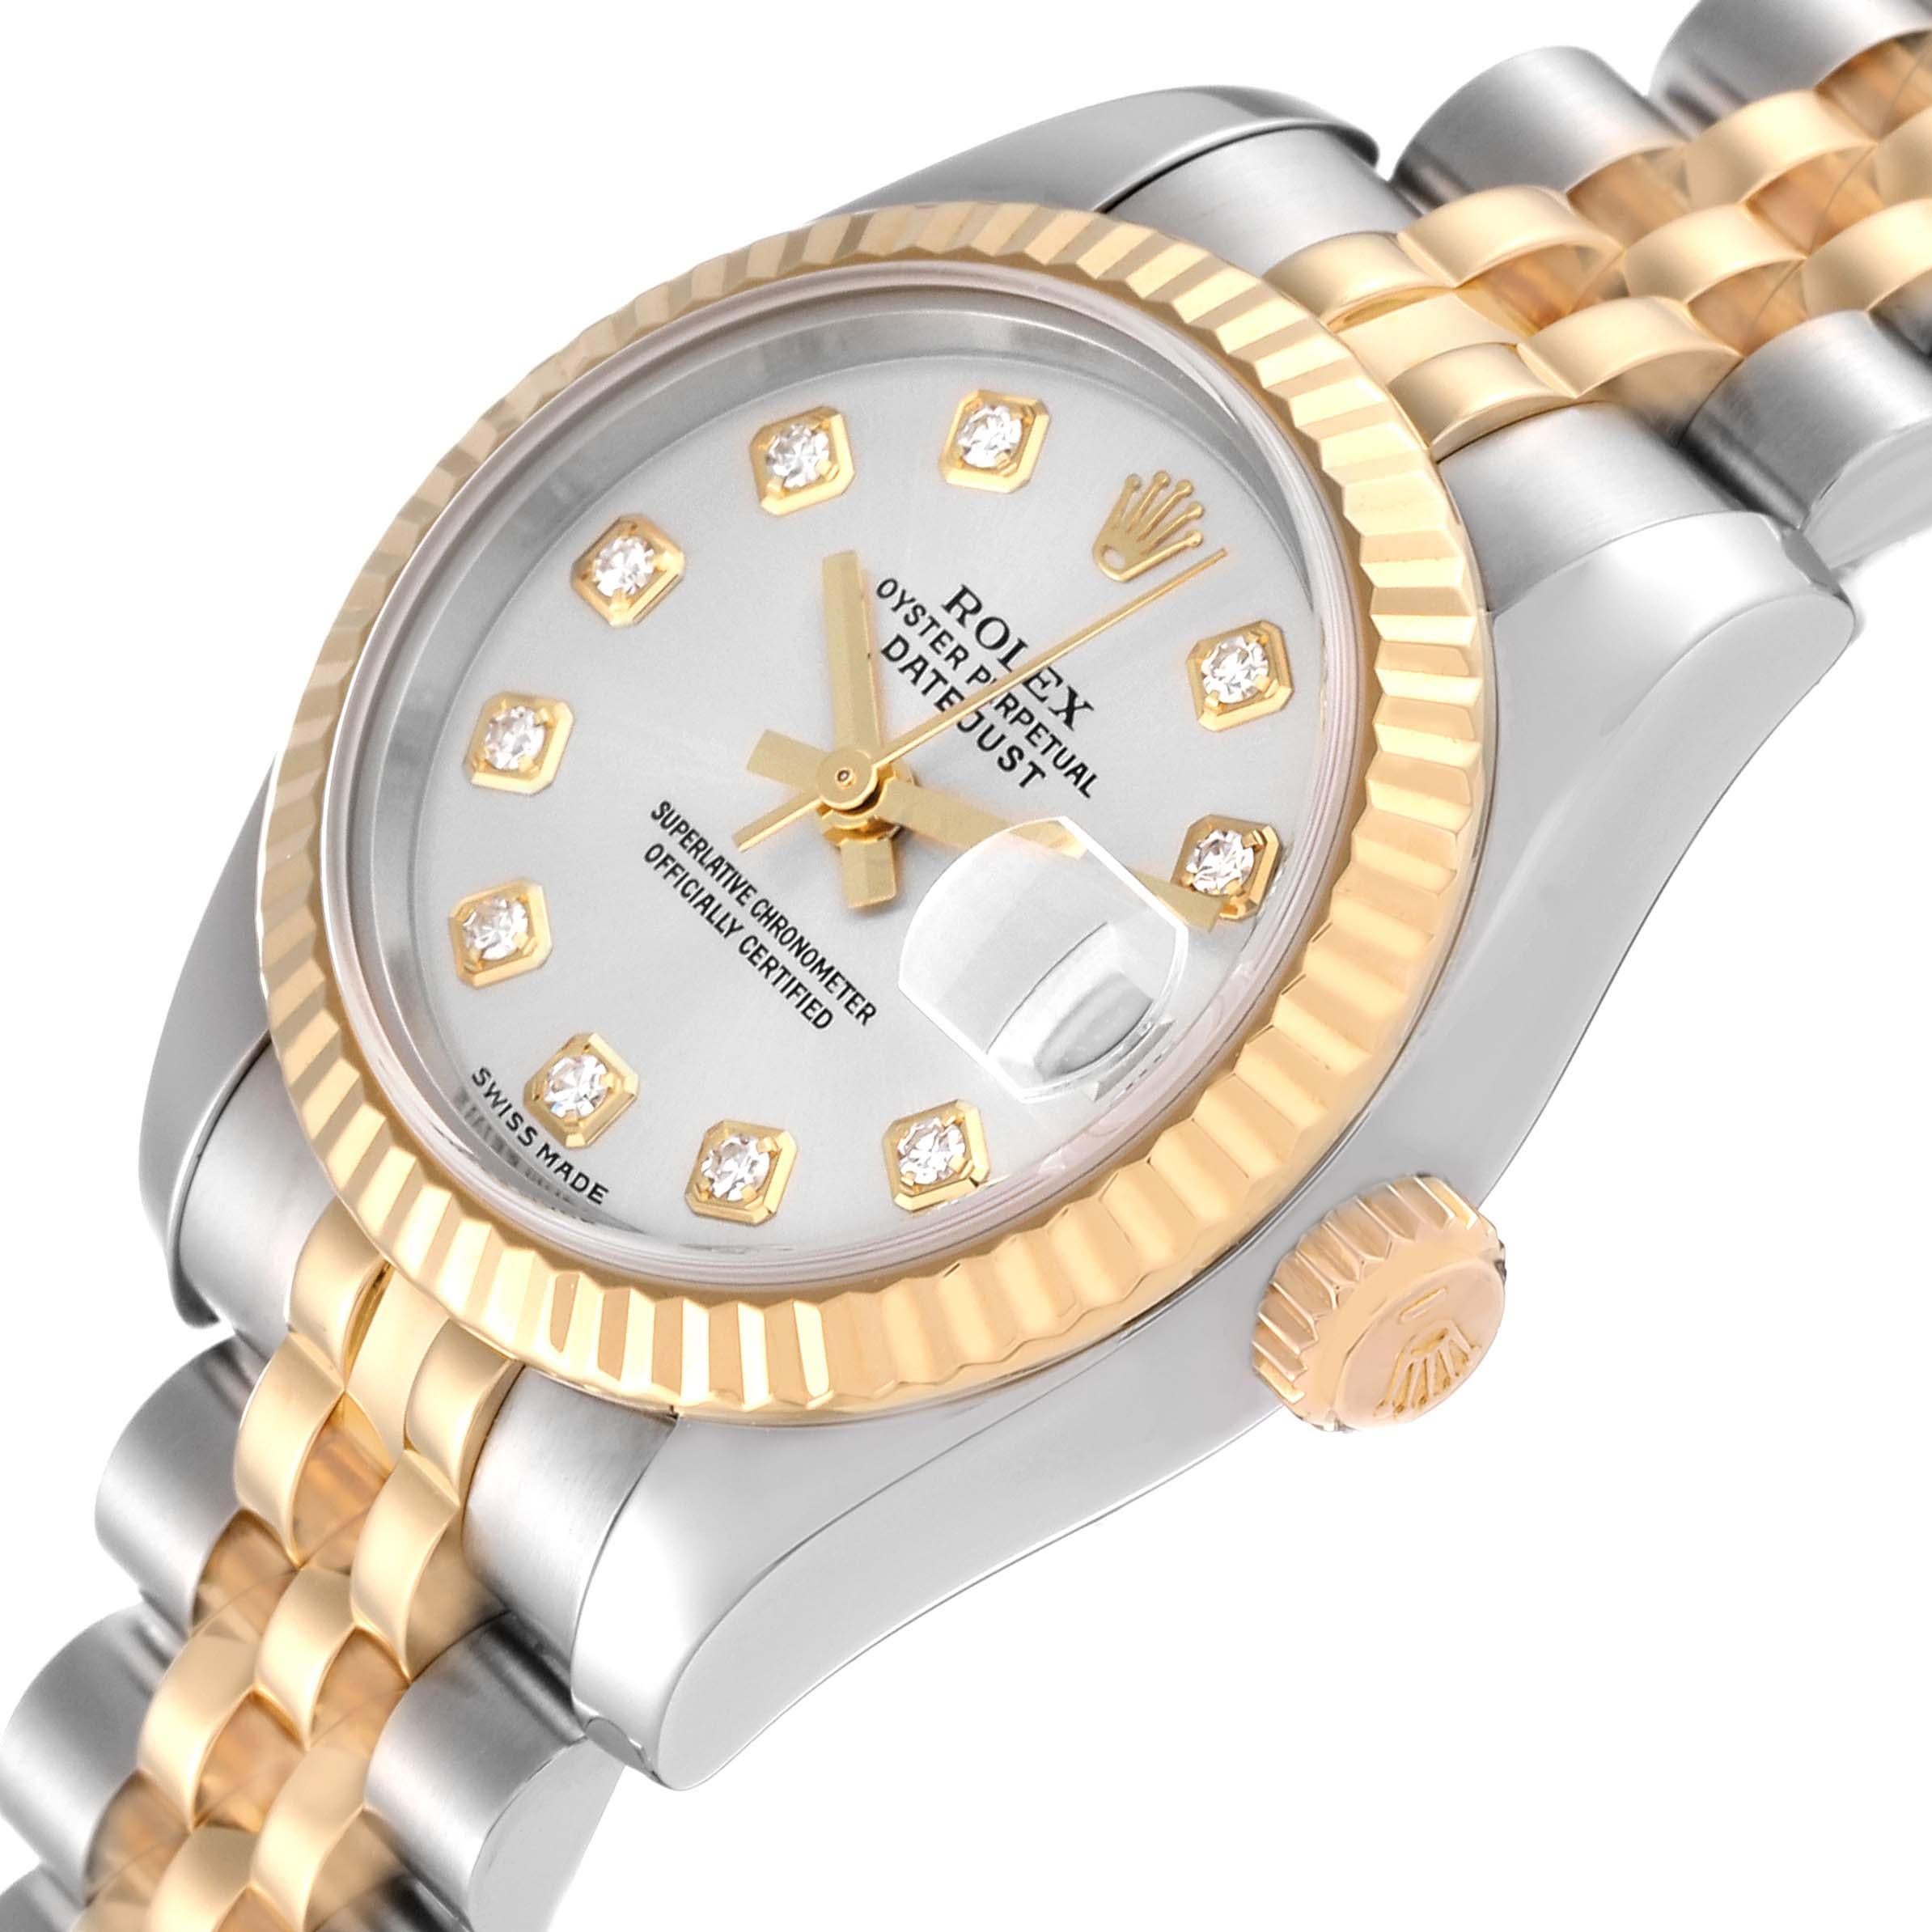 Rolex Datejust 26 Steel Yellow Gold Diamond Dial Ladies Watch 179173 For Sale 1